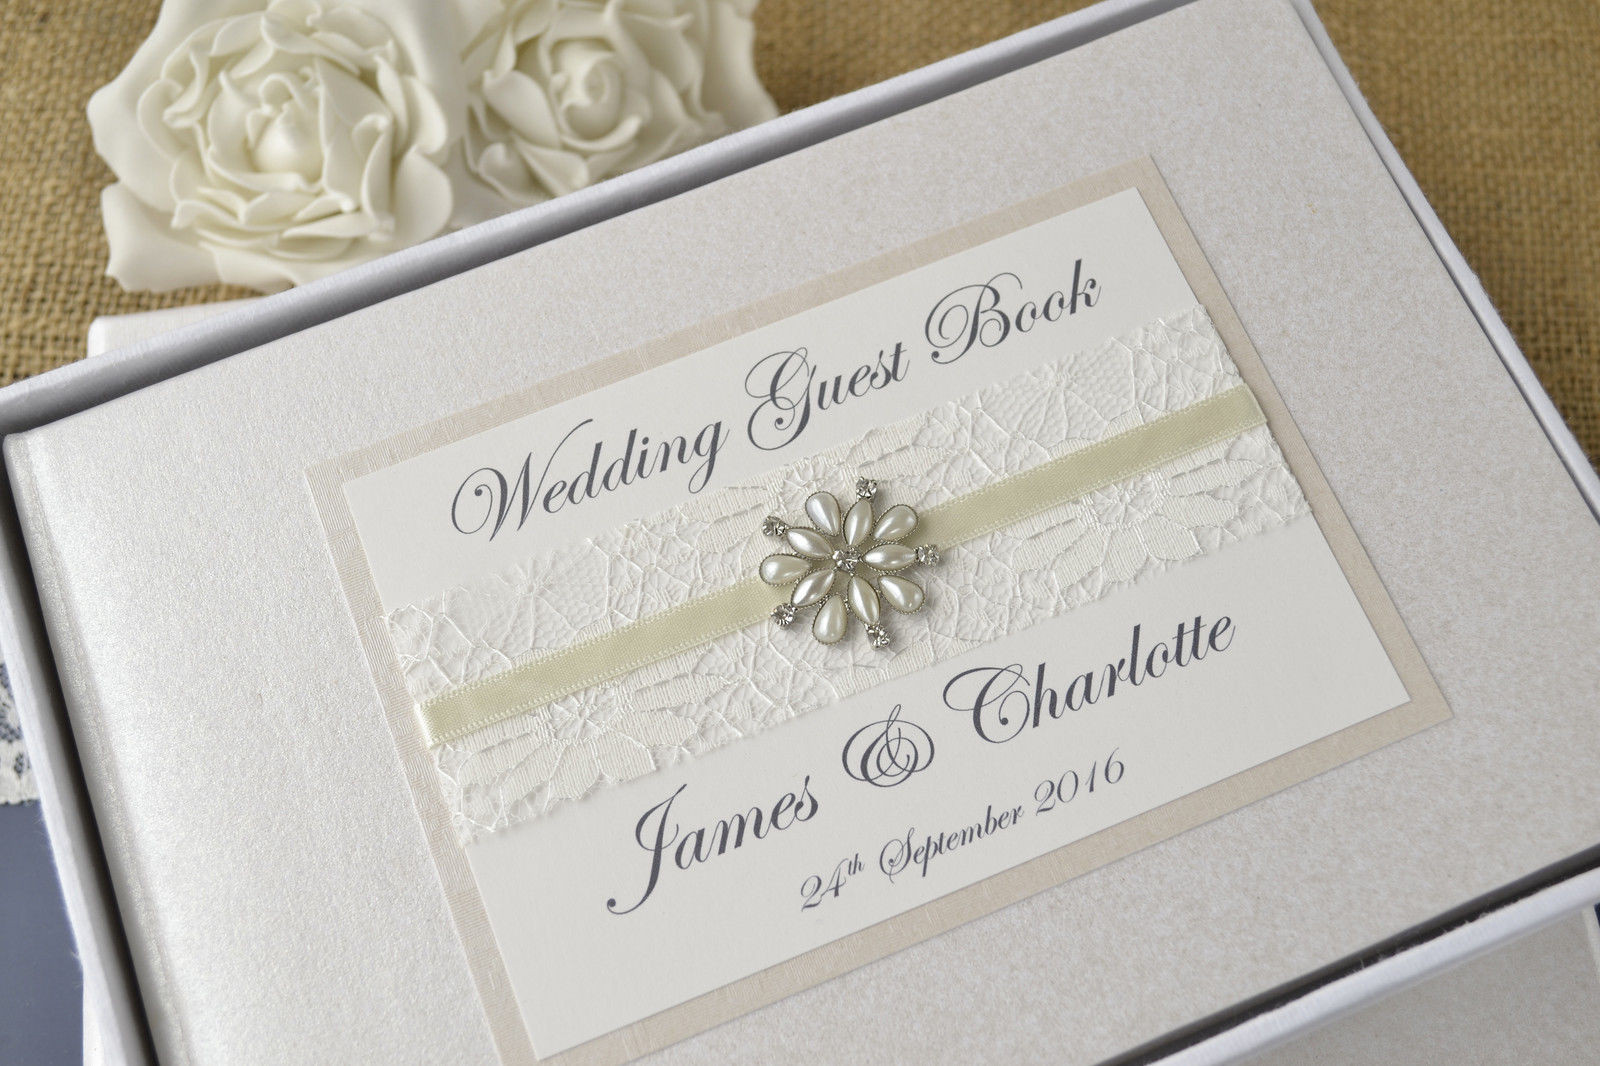 Guest Book For Weddings
 Personalised Wedding Guest Book – Vintage lace & jewel